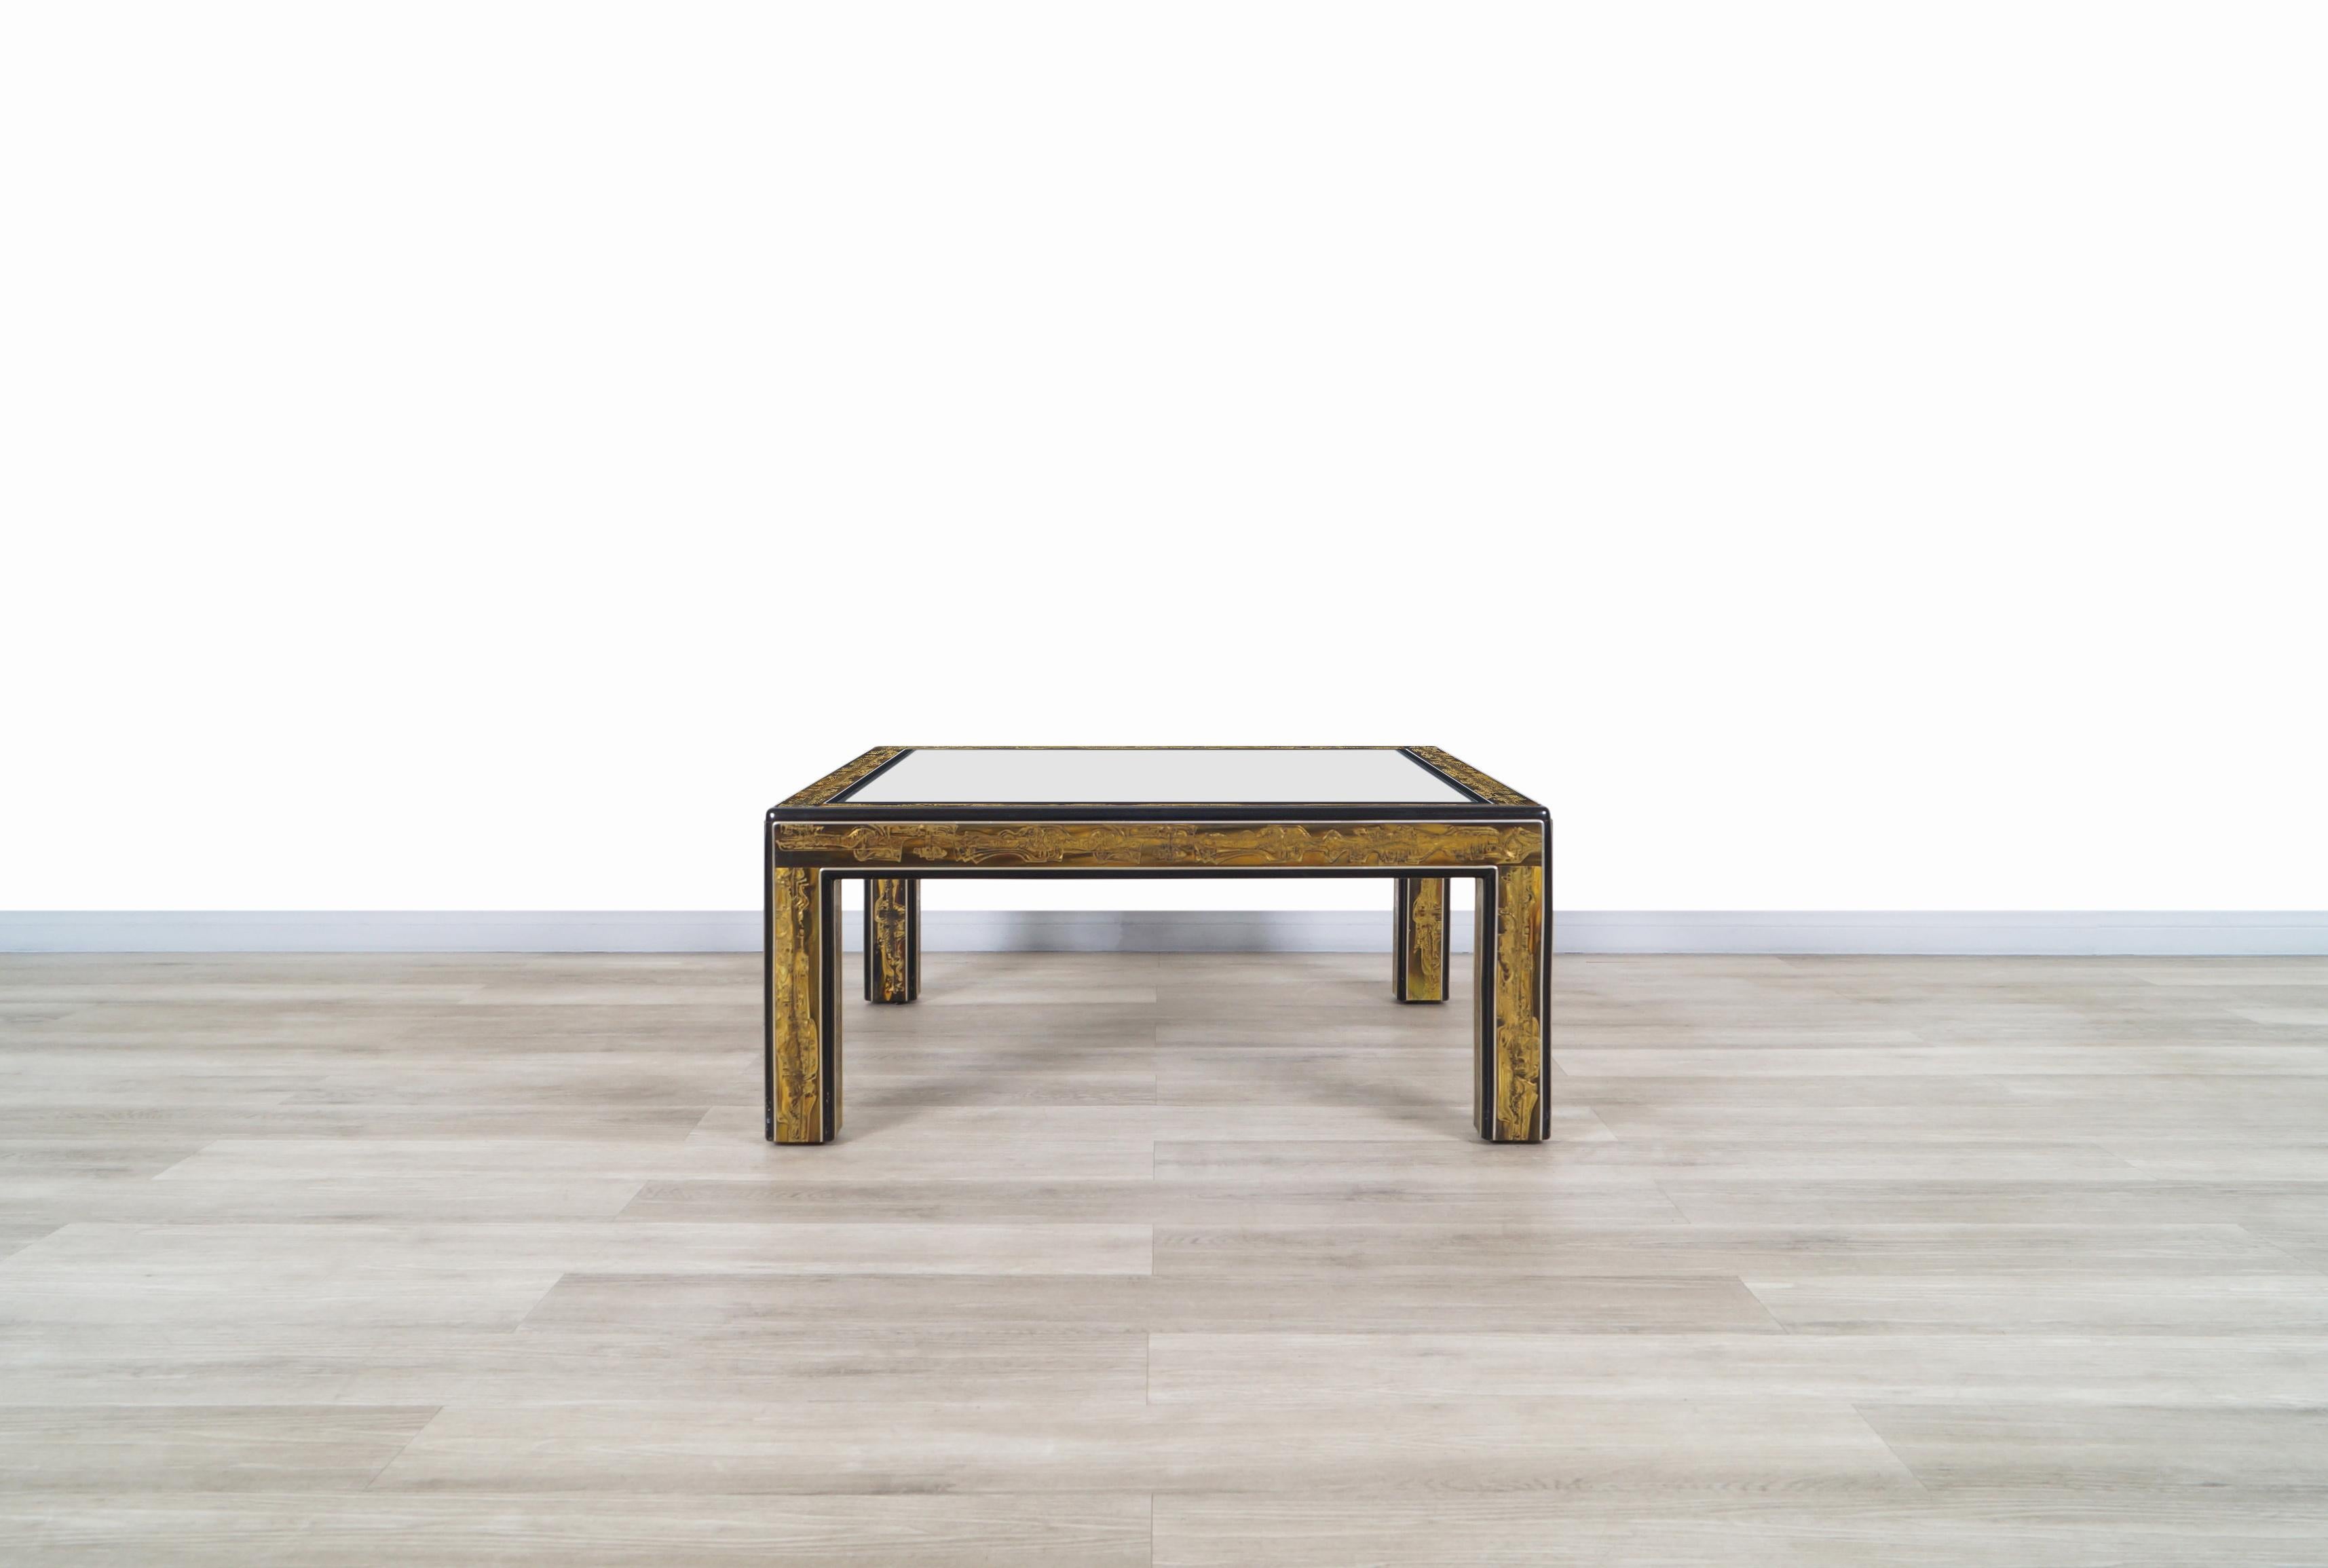 Wonderful vintage acid etched brass coffee table designed by Bernhard Rohne for Mastercraft in United States, circa 1970s. This coffee table presents a unique aesthetic throughout its structure. Features acid etched brass strips that show detailed